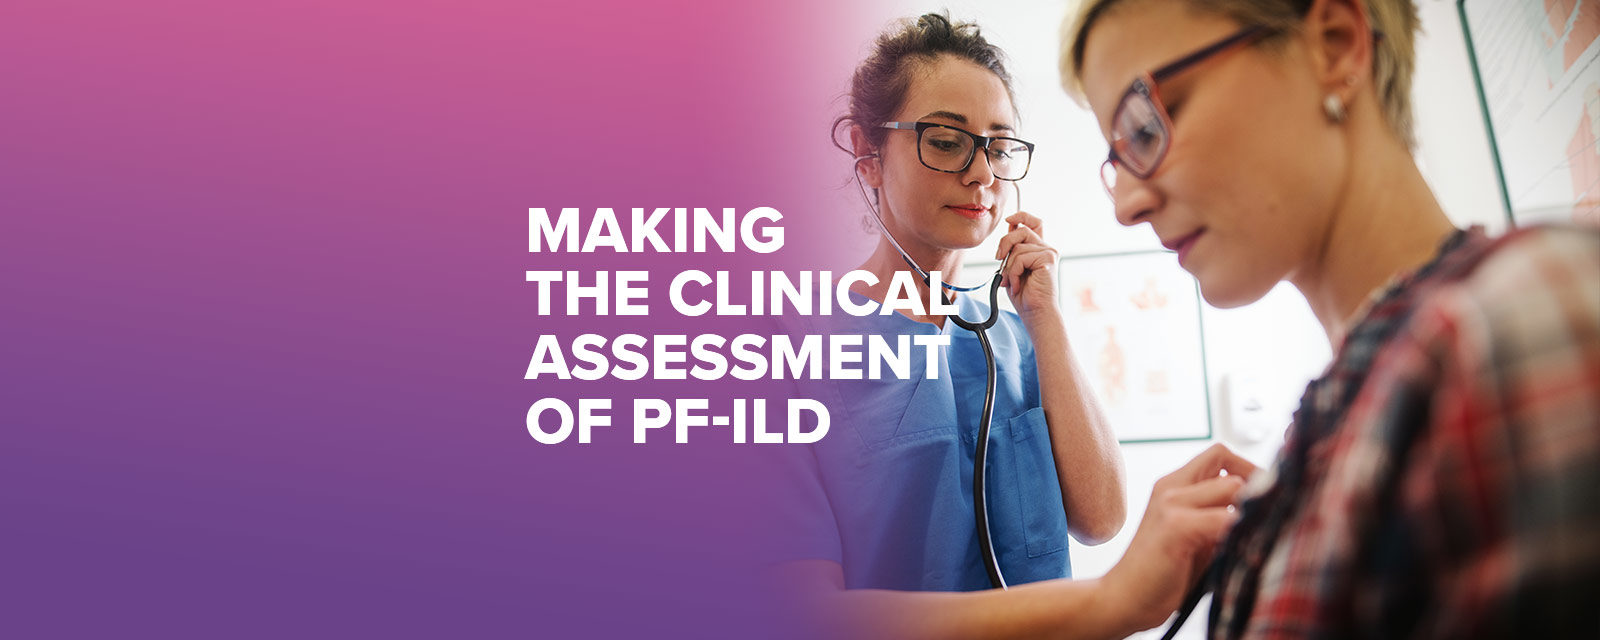 Making the Clinical Assessment of PF-ILD